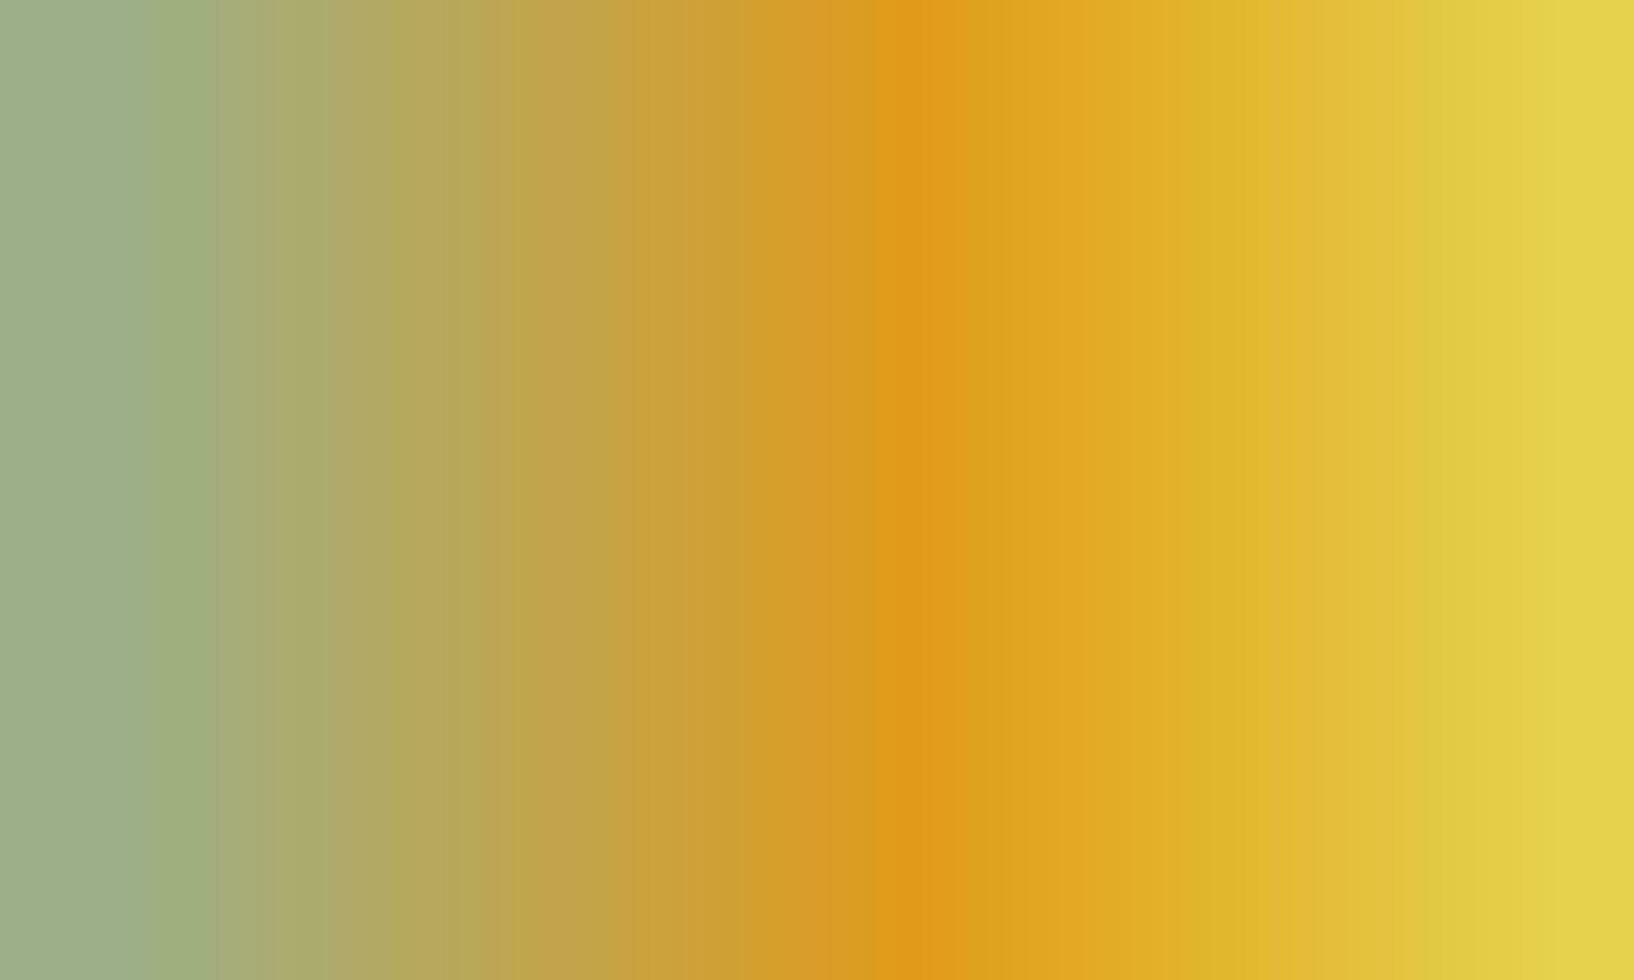 Design simple sage green,orange and yellow gradient color illustration background photo